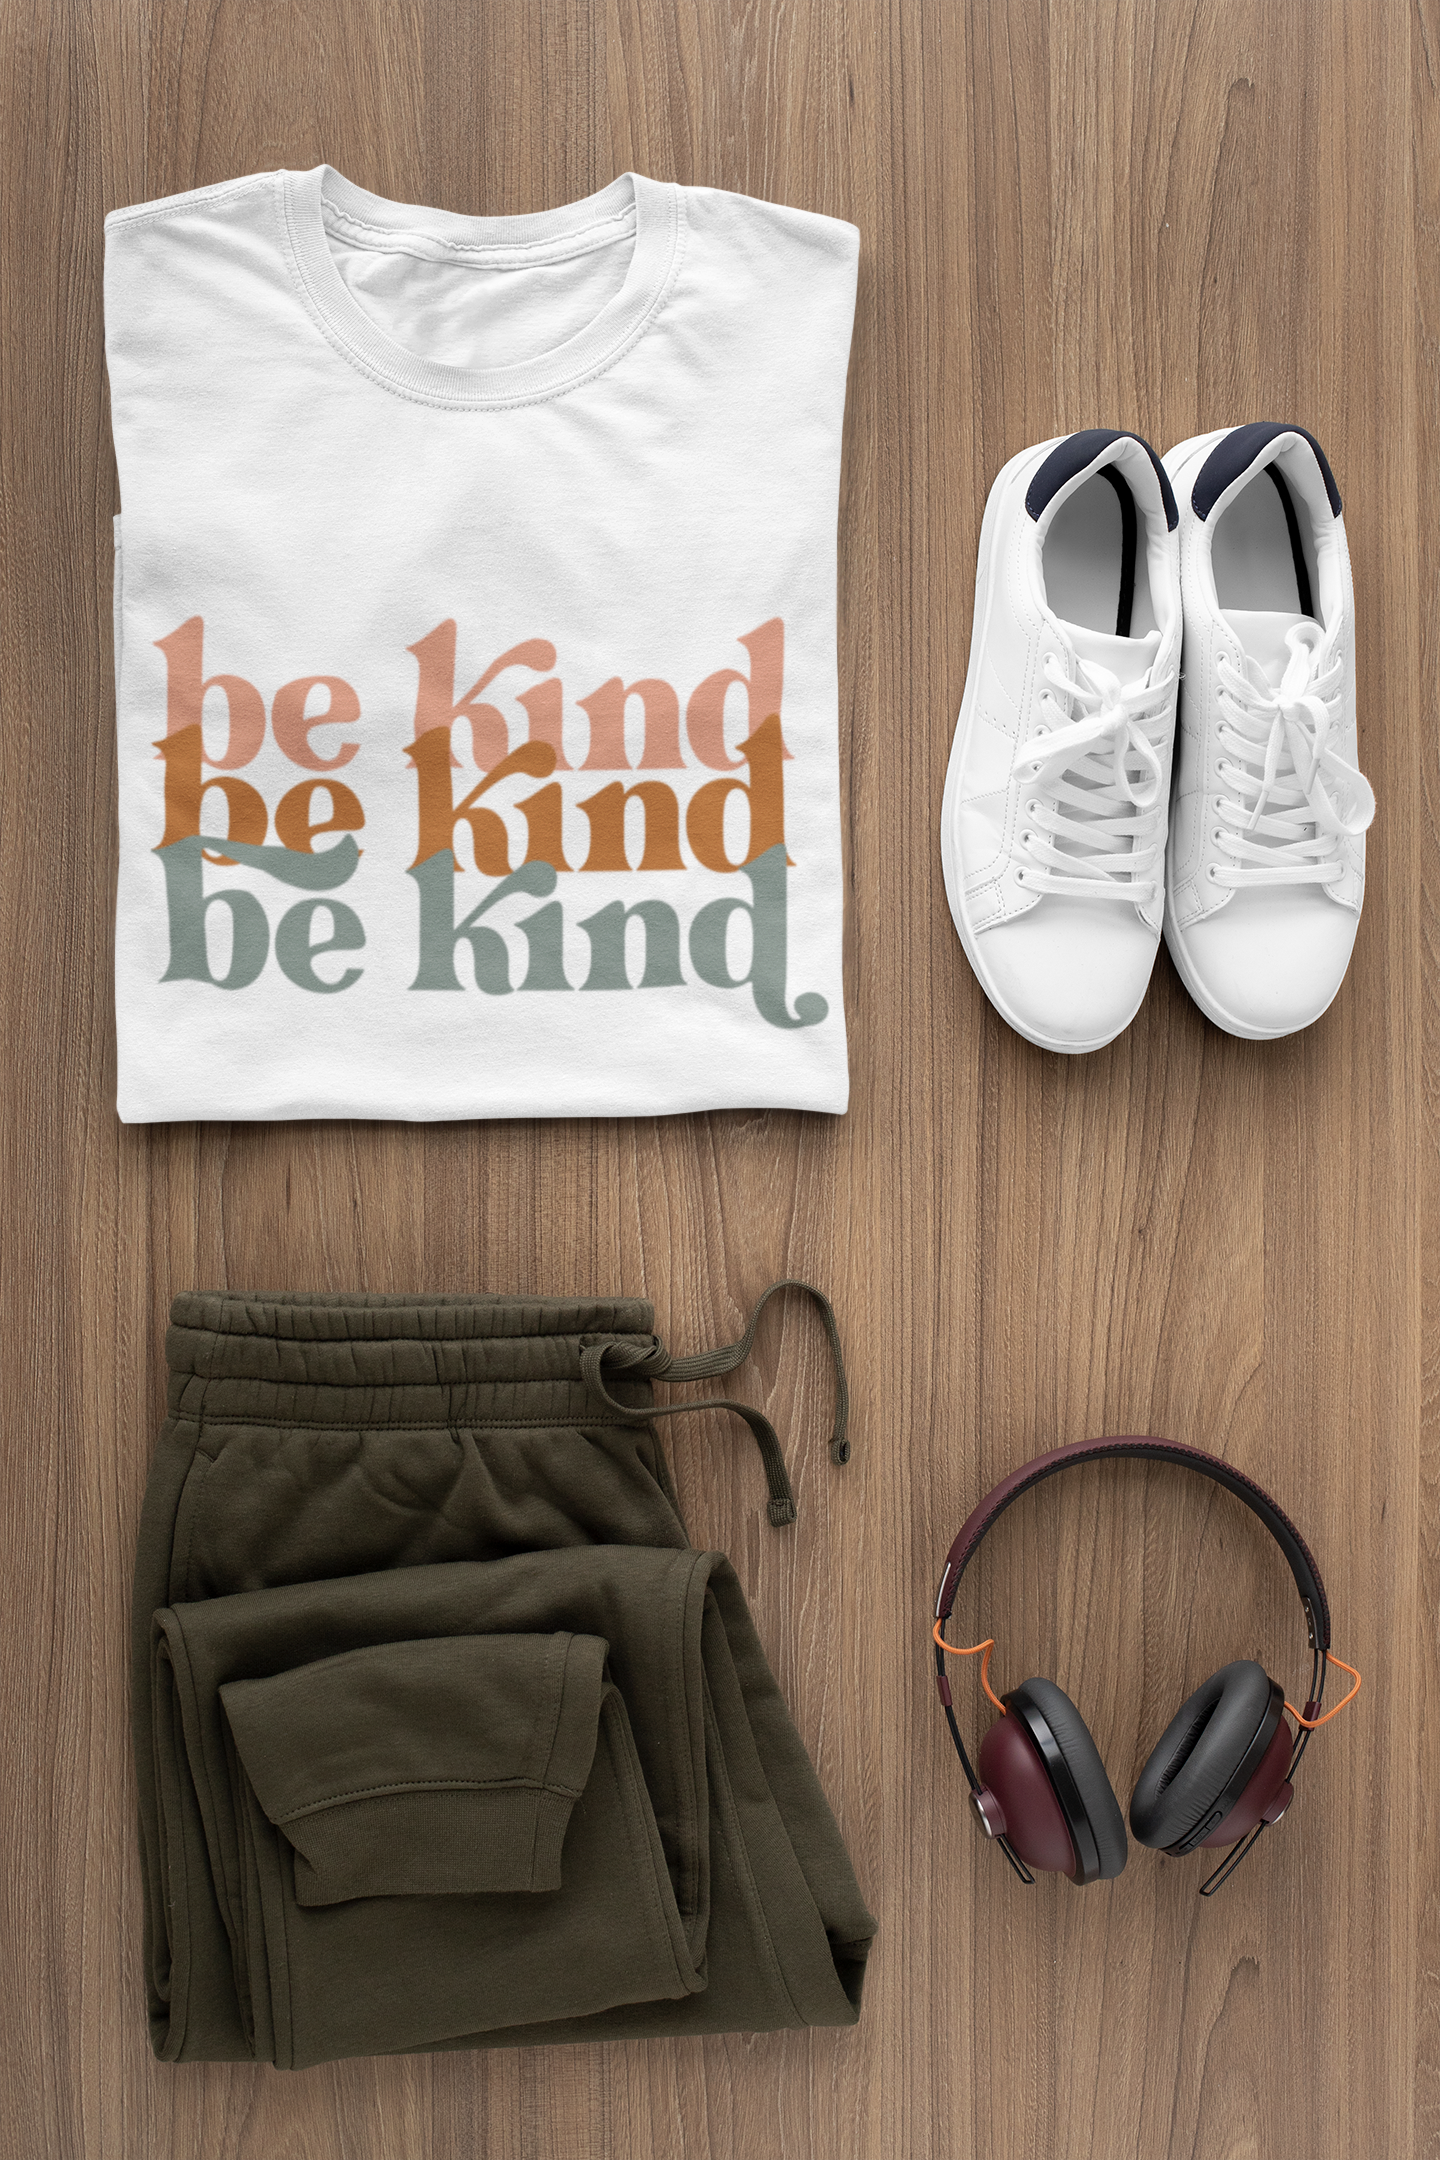 Be Kind- Full Color Heat Transfer